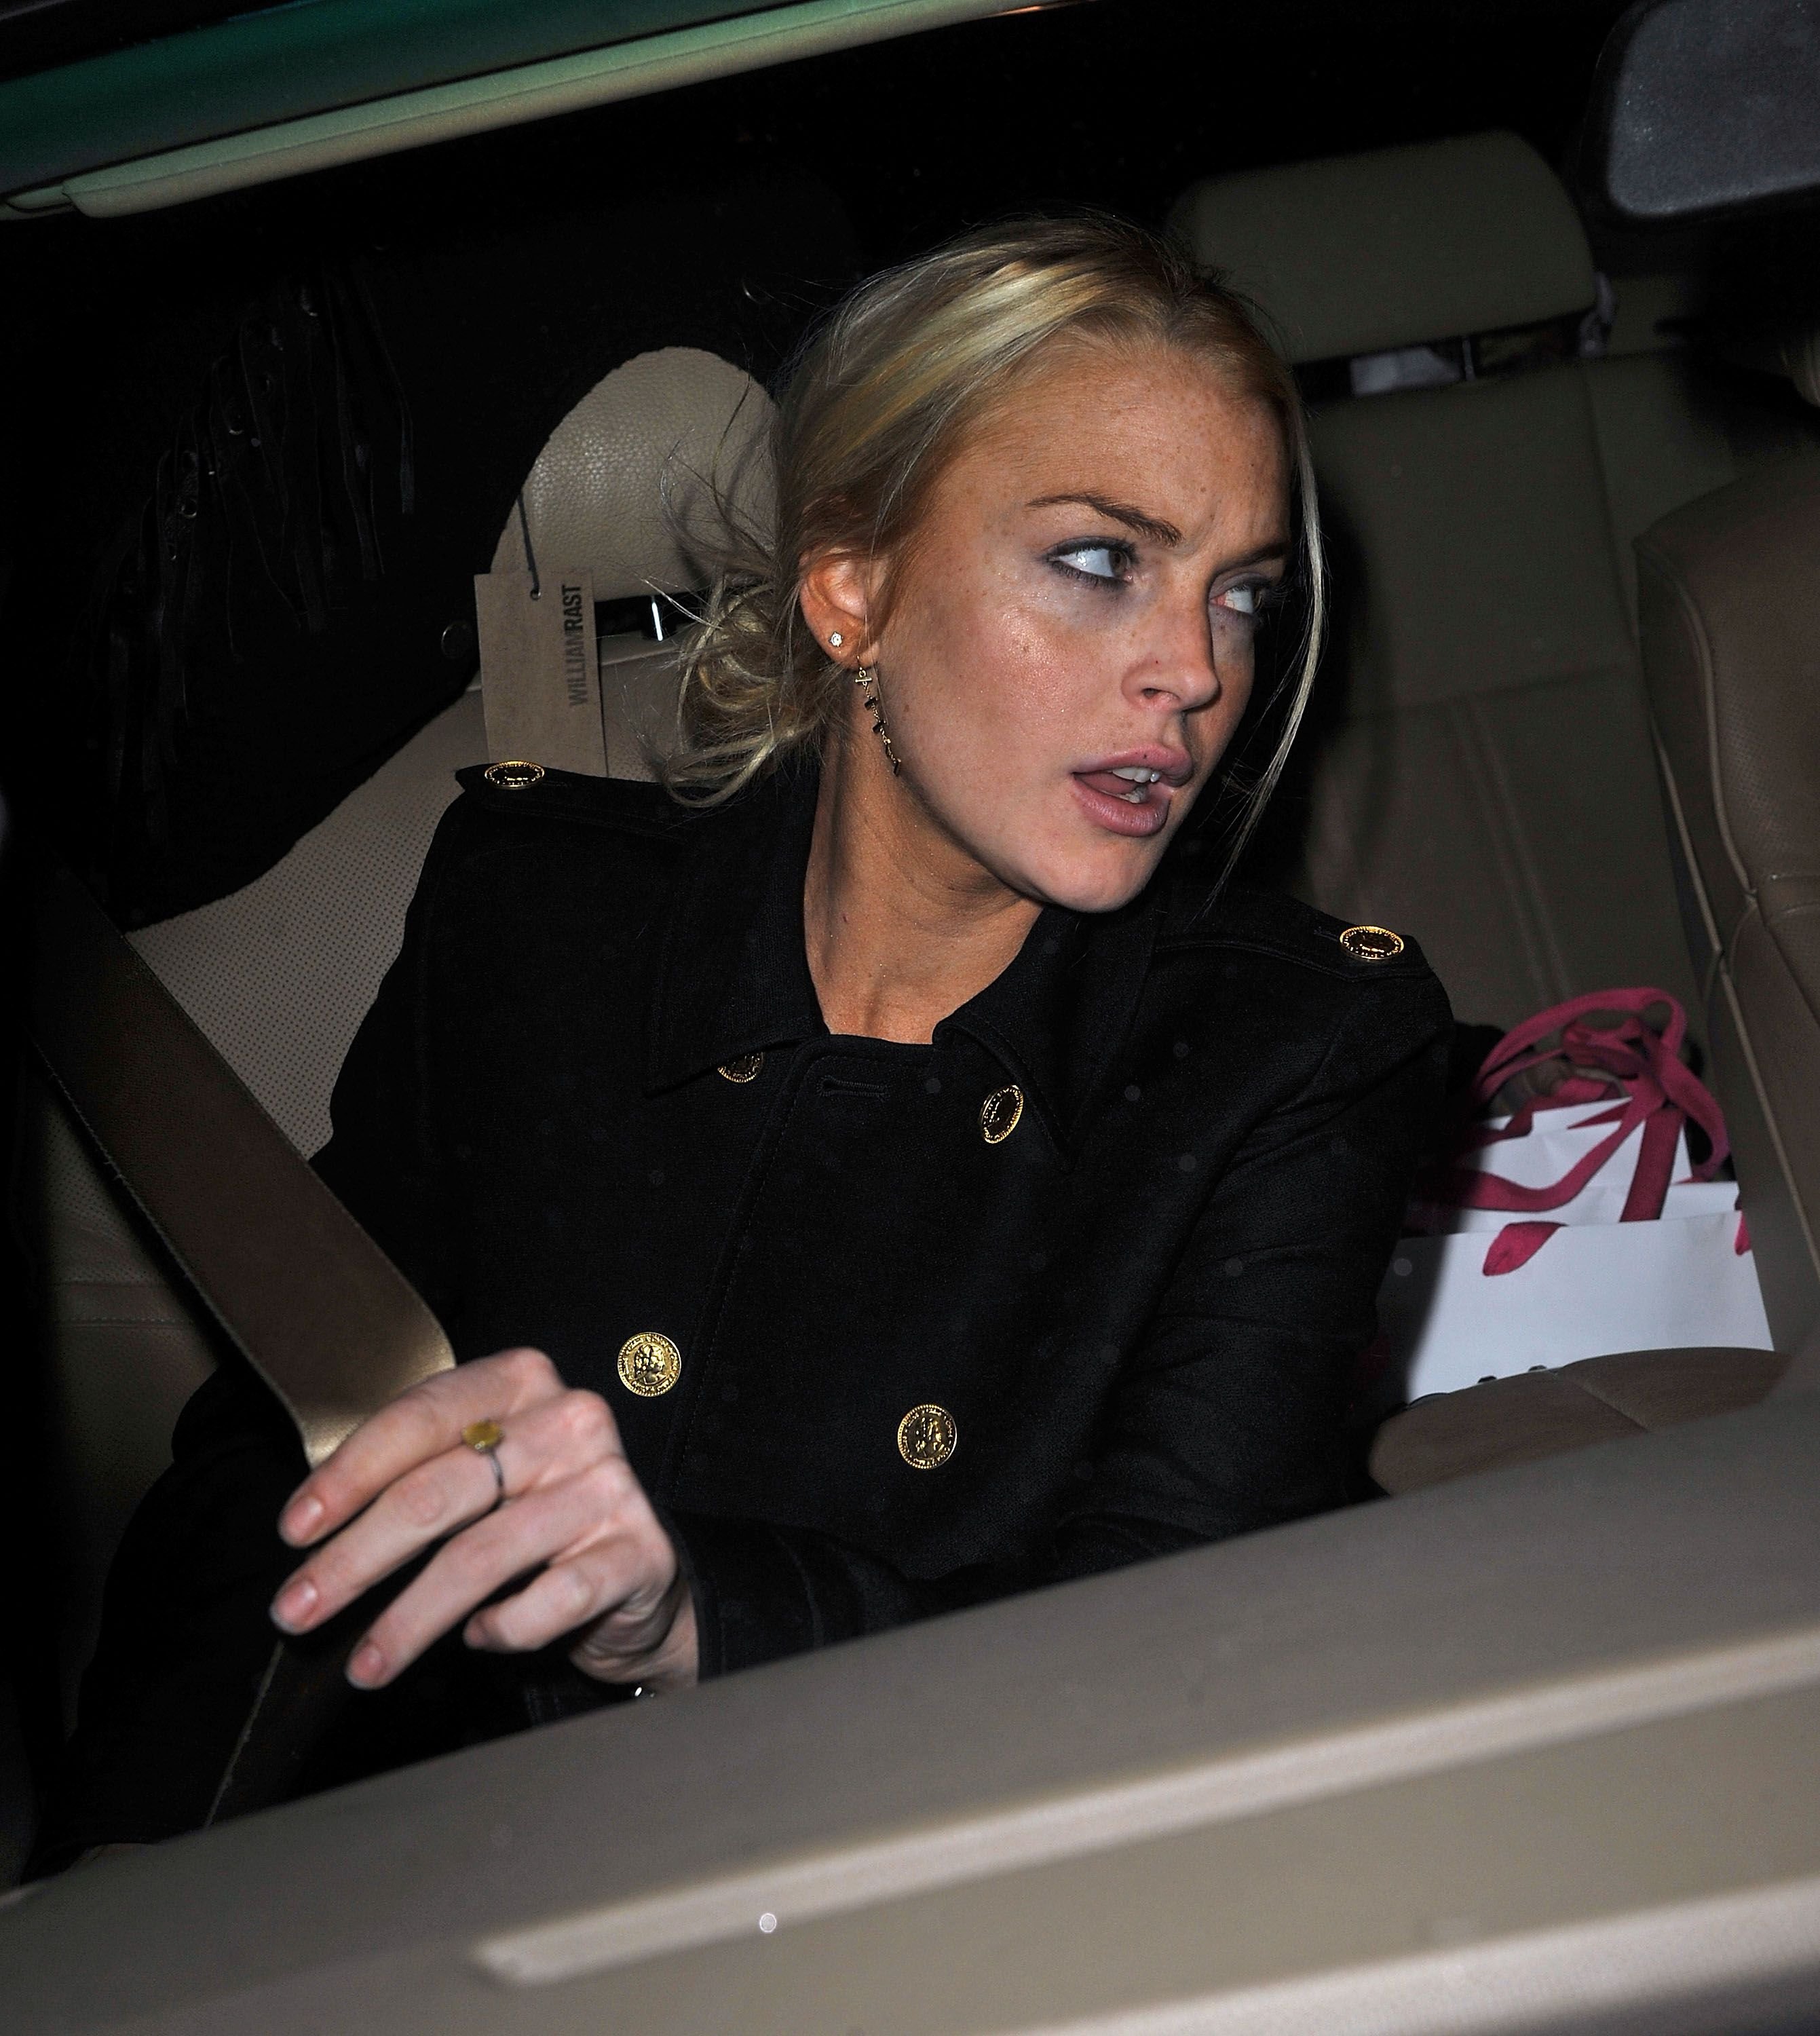 Lindsay Lohan leaving Intermix in SoHo in New York City. | Photo: James Devaney/WireImage via Getty Images